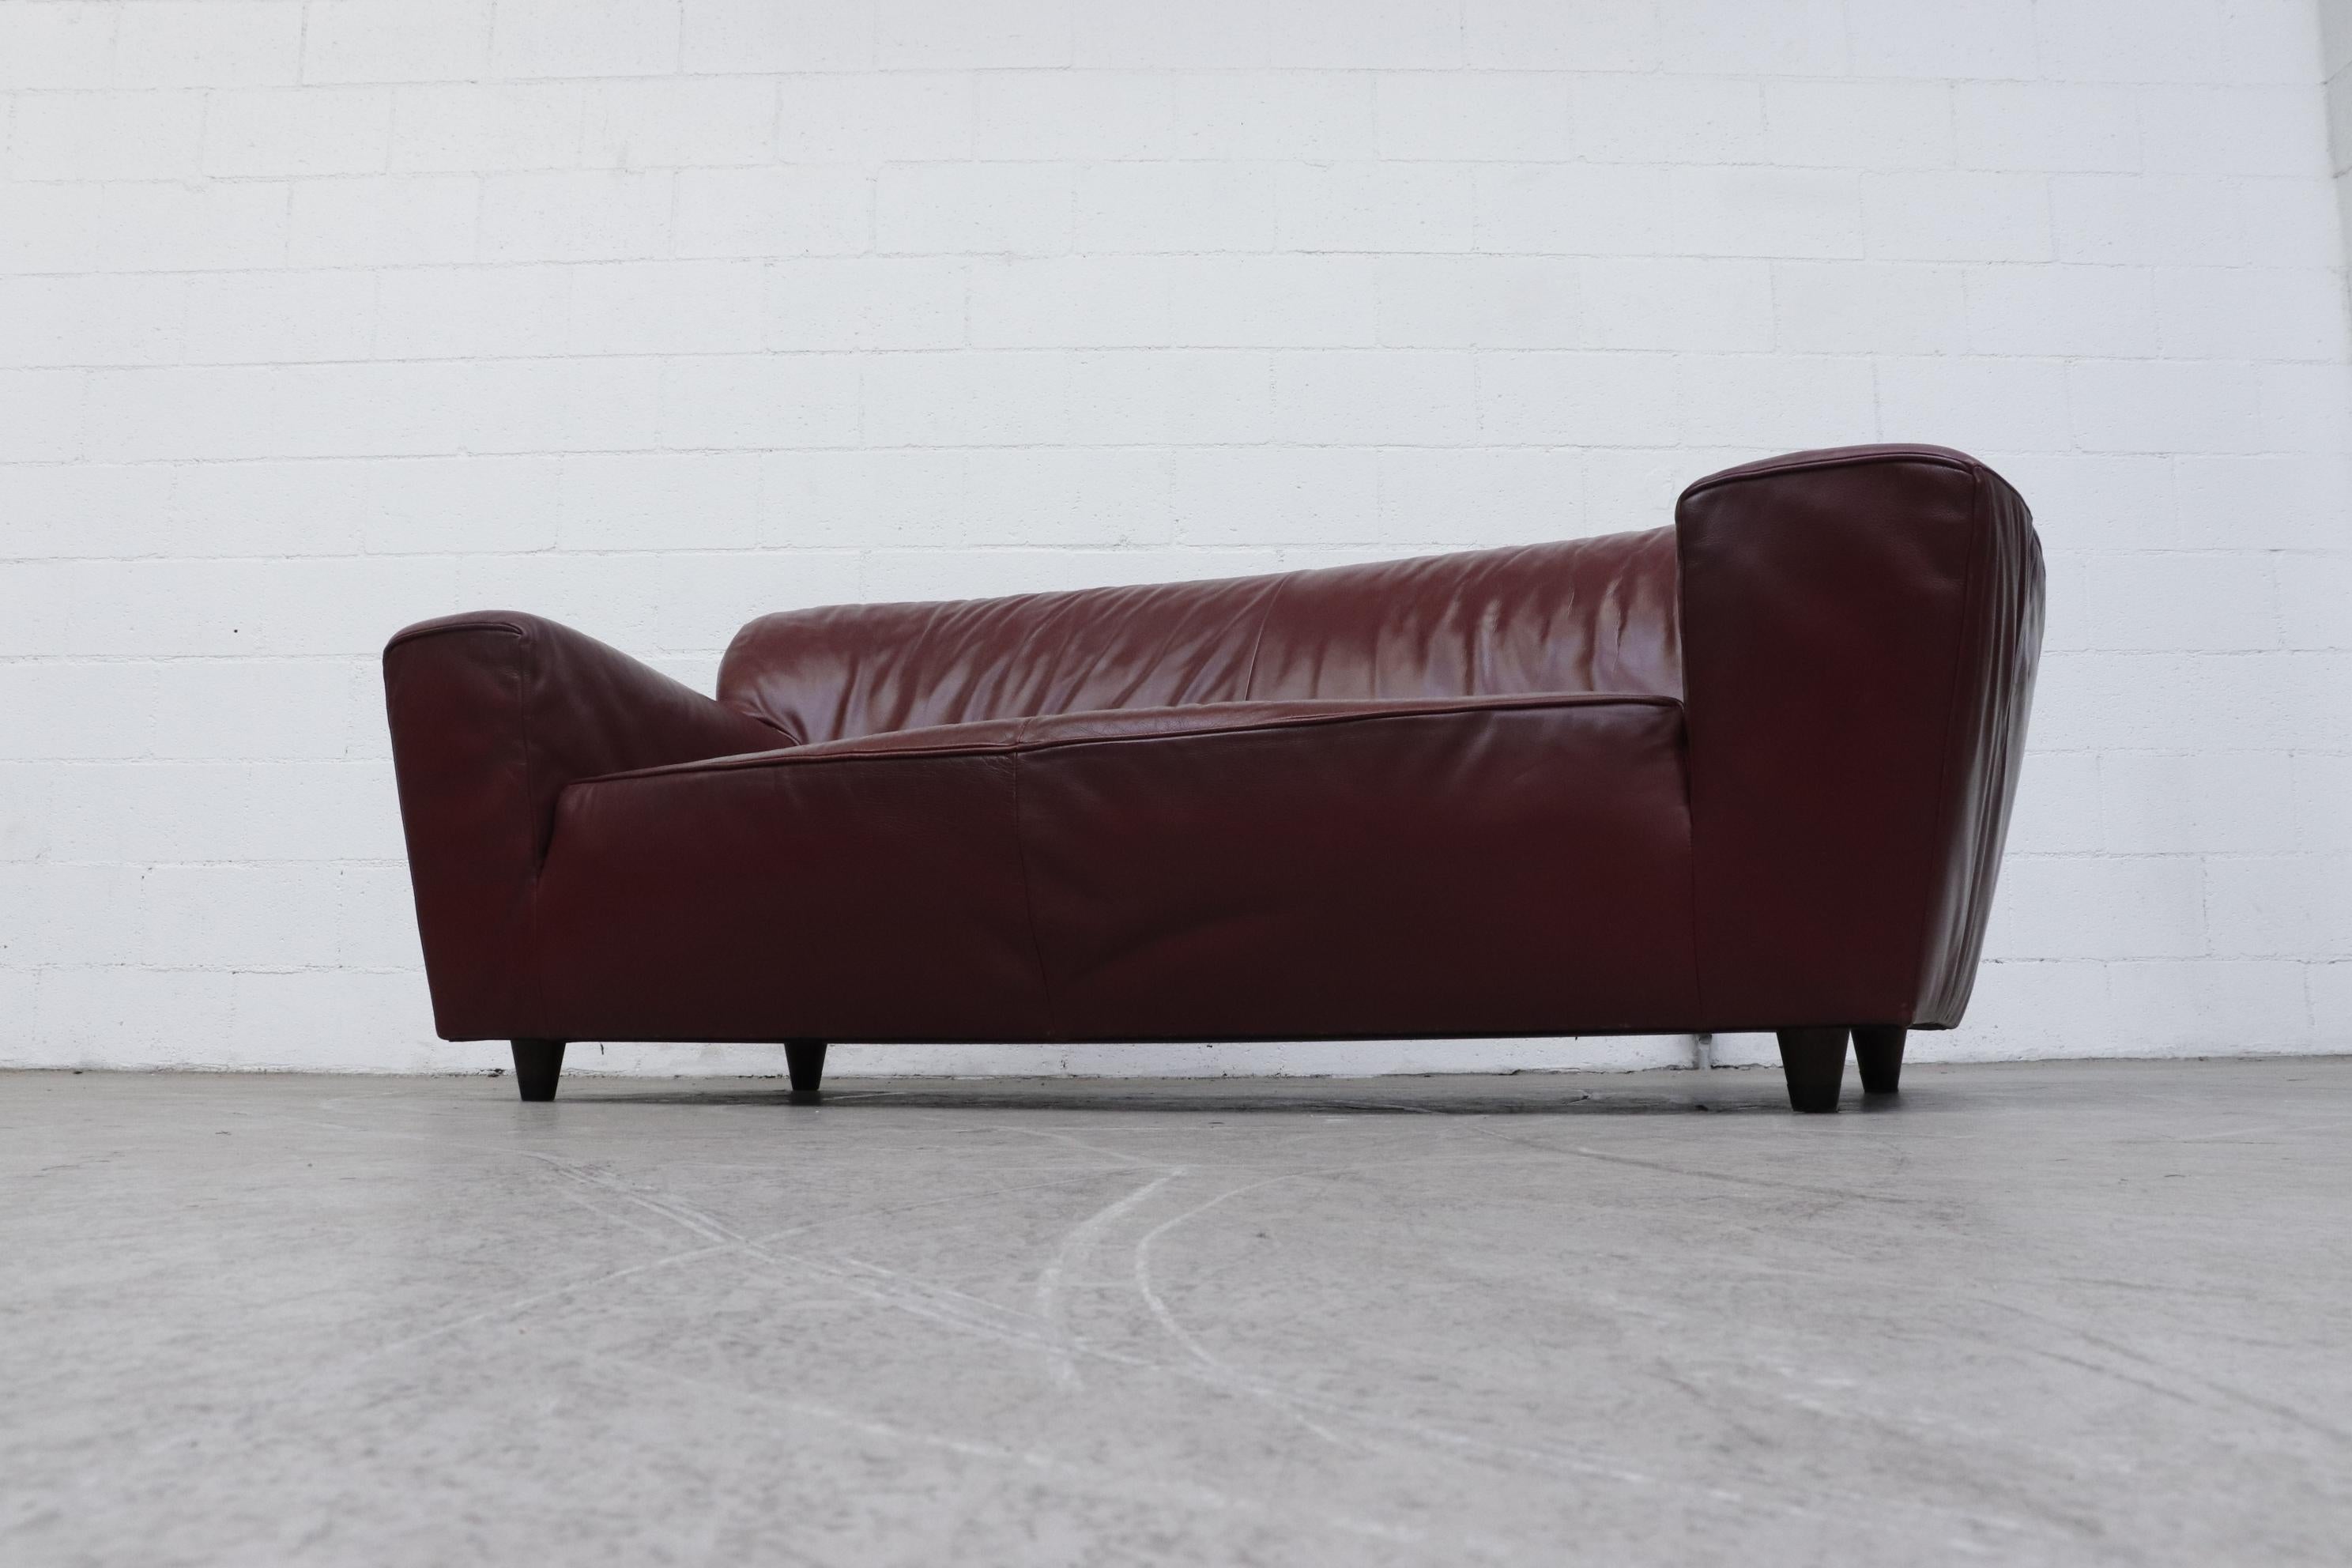 Midcentury Gerard Van Den Berg 'Corvette' sofa in Bordeaux leather with short stubby wood legs. In original condition with visible wear and scratching consistent with age and use. Another 'Corvette' sofa also available (LU922421844162).